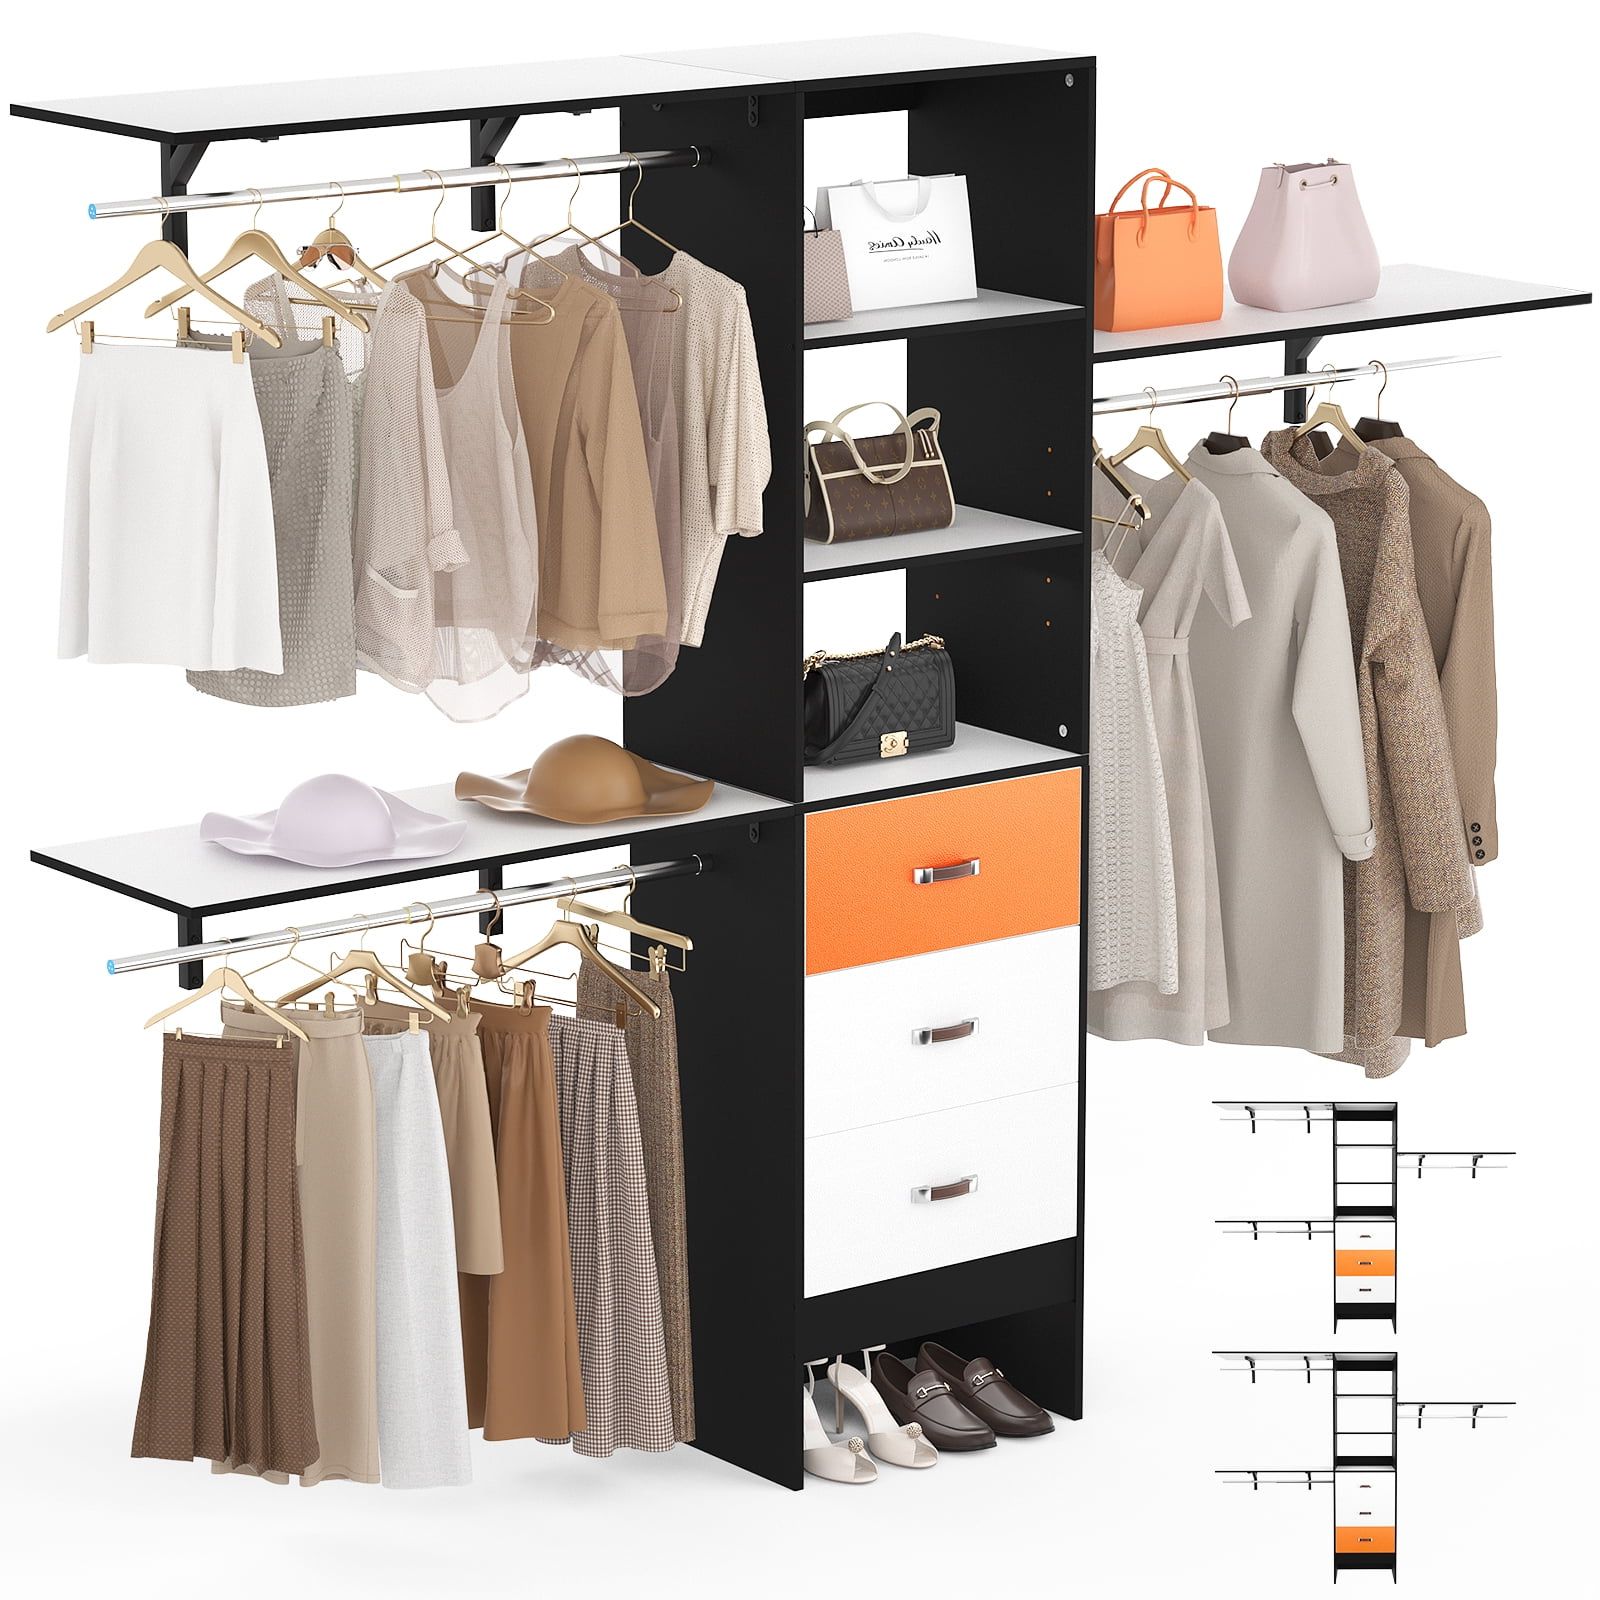 2018 3 Shelving Towers Wardrobes Regarding Homieasy 96 Inches Closet System, 8ft Walk In Closet Organizer With 3  Shelving Towers, Heavy Duty Clothes Rack With 3 Drawers, Built In Garment  Rack, 96" L X 16" W X 75" H, (Photo 1 of 10)